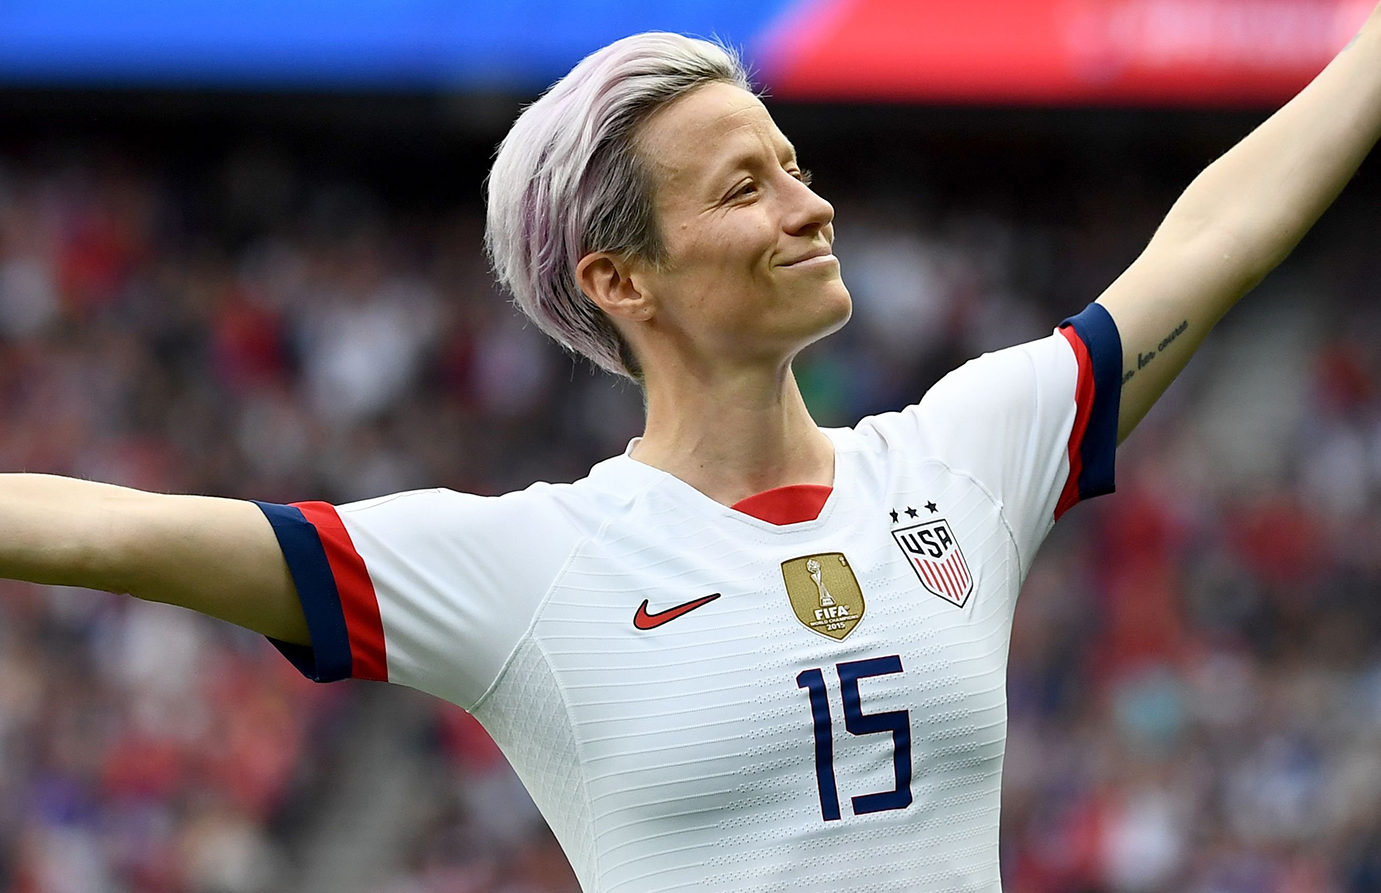 7. Megan Rapinoe's Blue Hair: A Bold Statement on and off the Soccer Field - wide 3